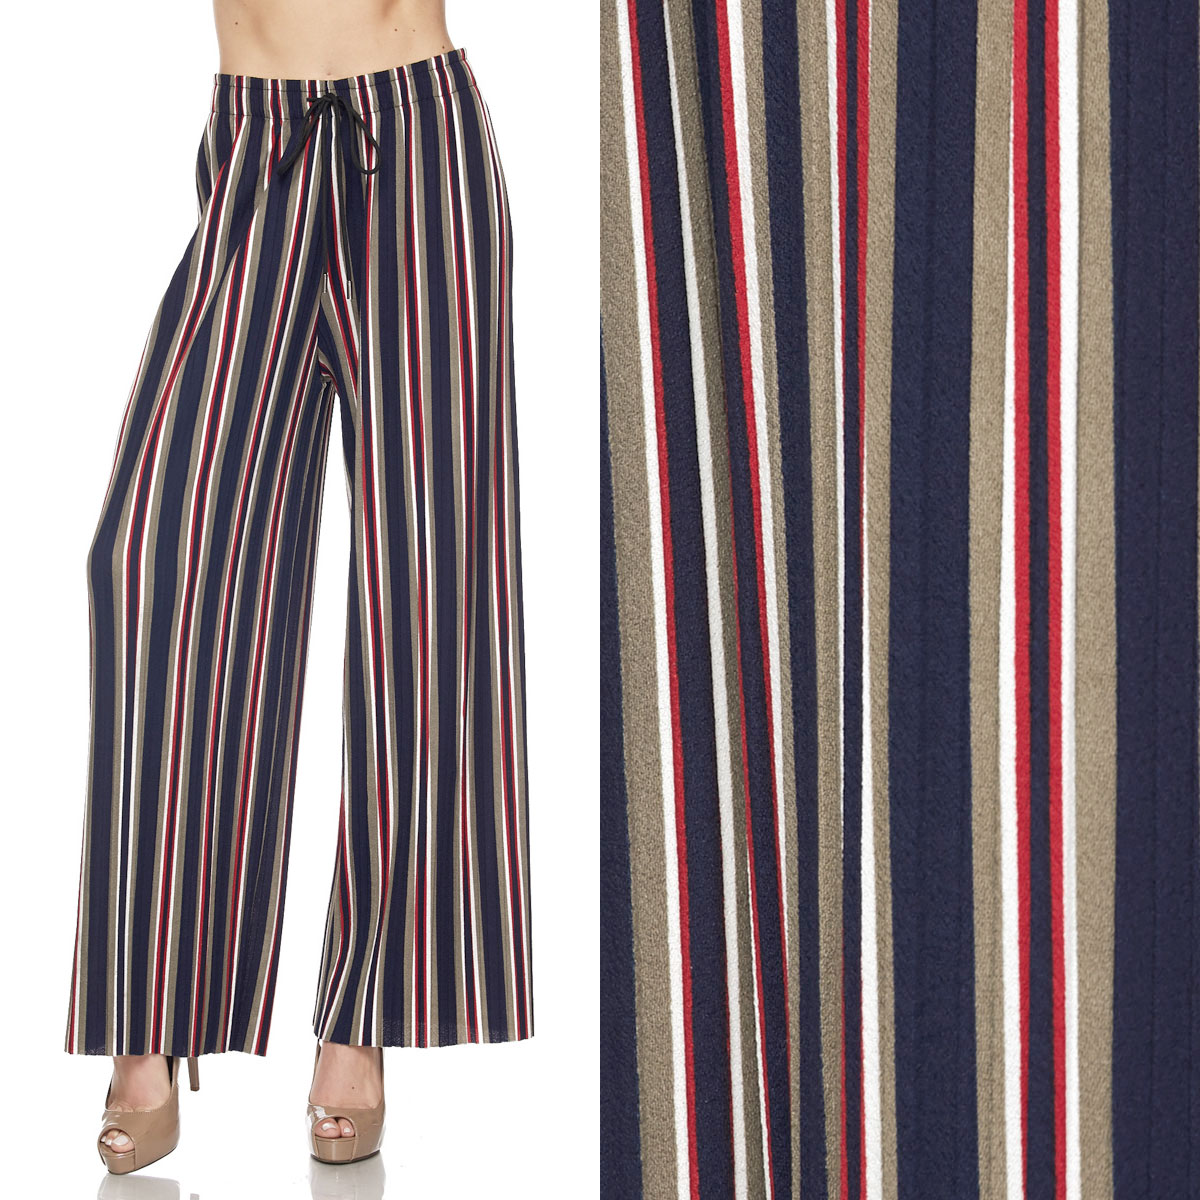 902ANP - Pleated Wide Leg Twill Pants #05 Striped Navy-Taupe-Red (S-L)